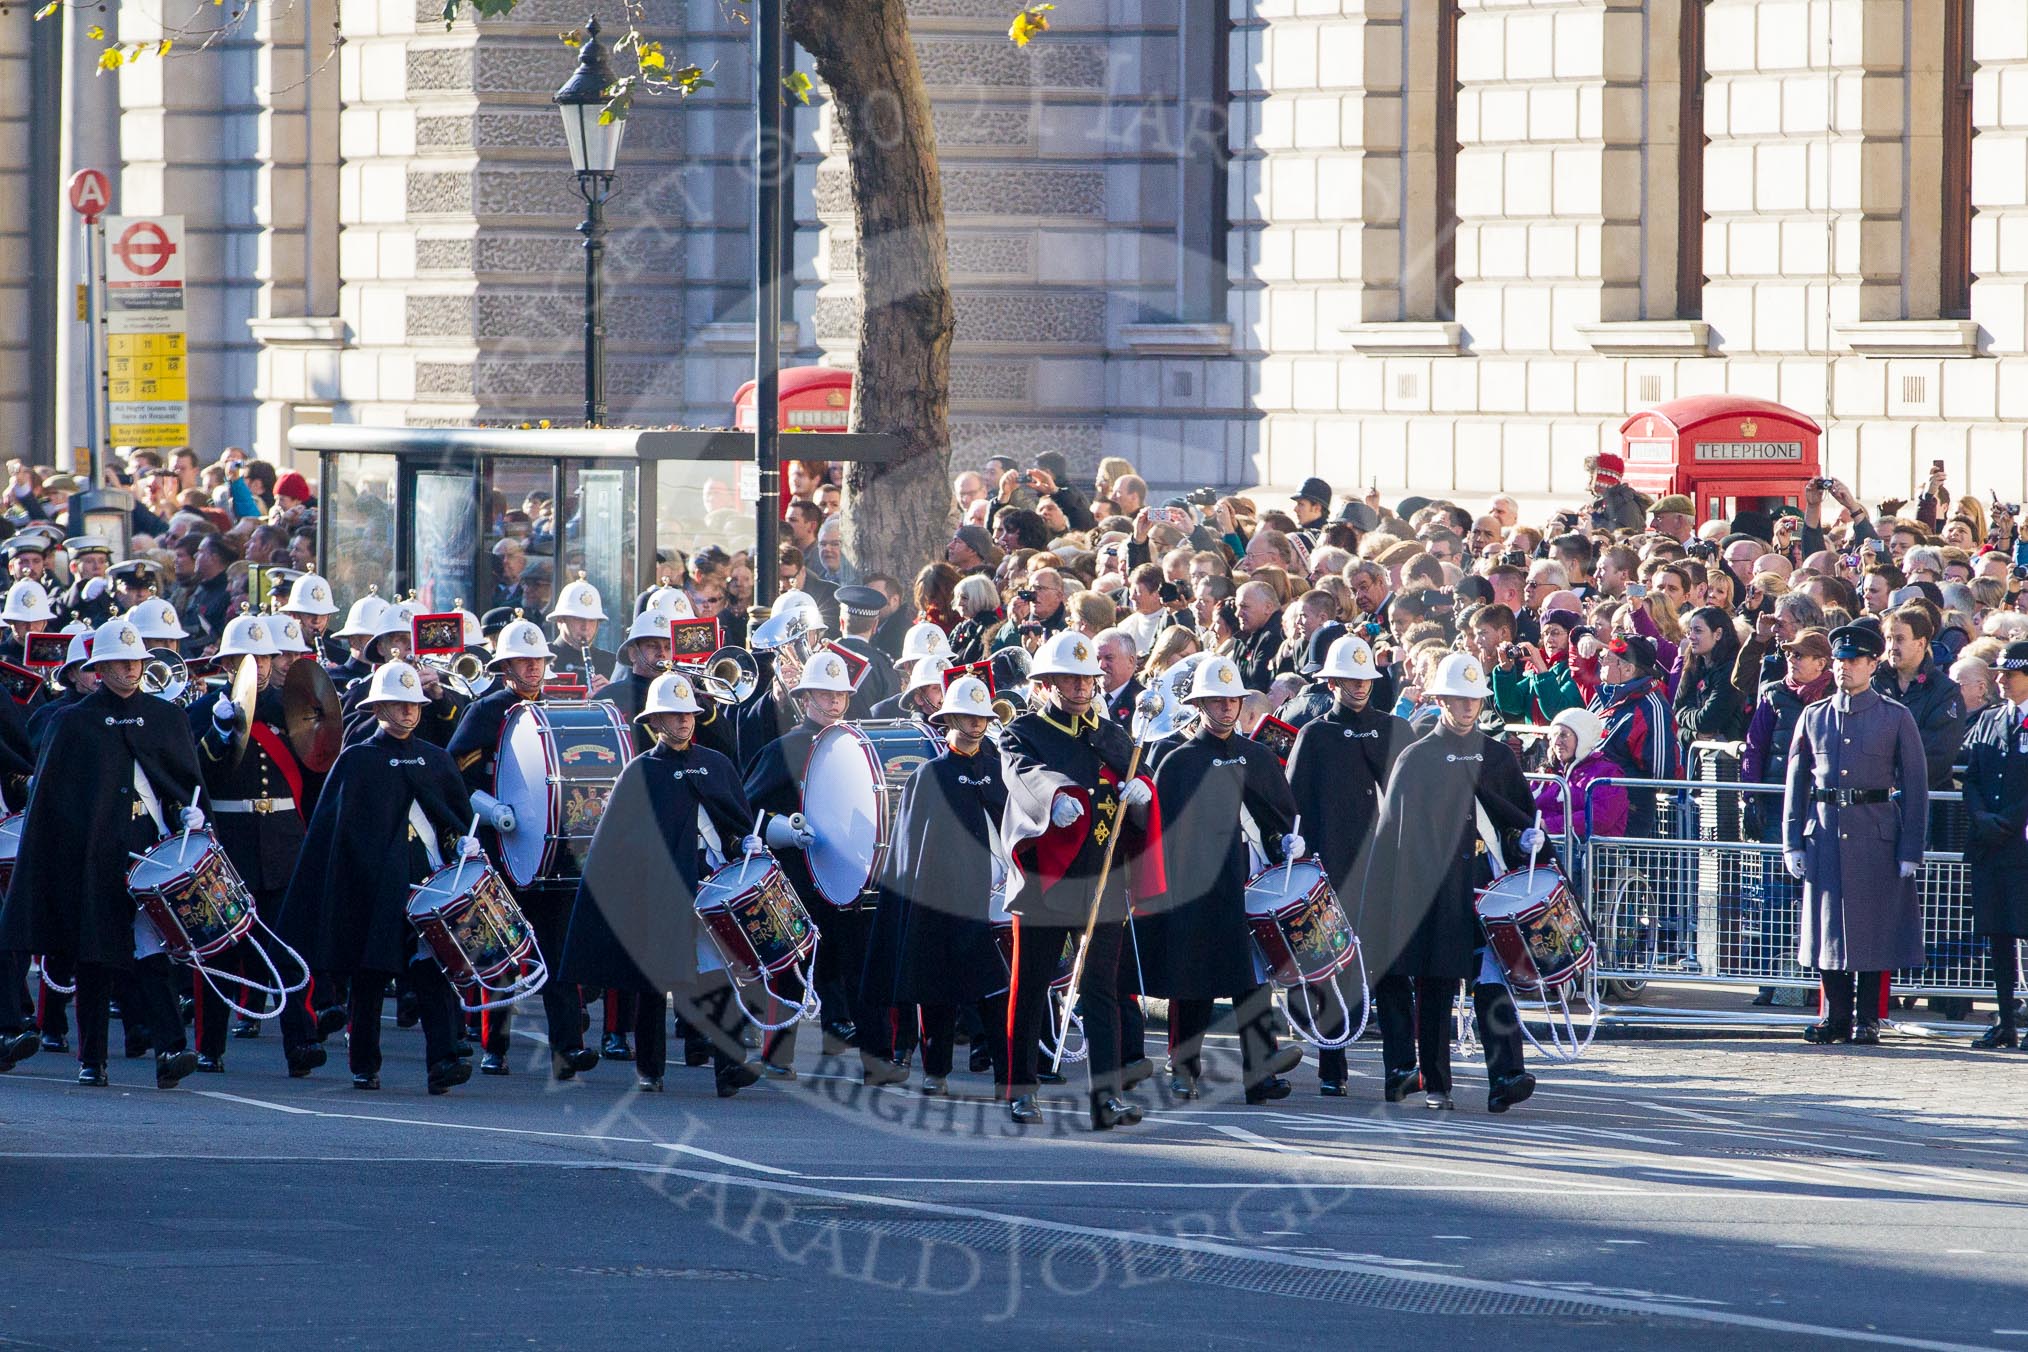 The Band of the Royal Marines arrives from Great George Street, on the western side of Whitehall.